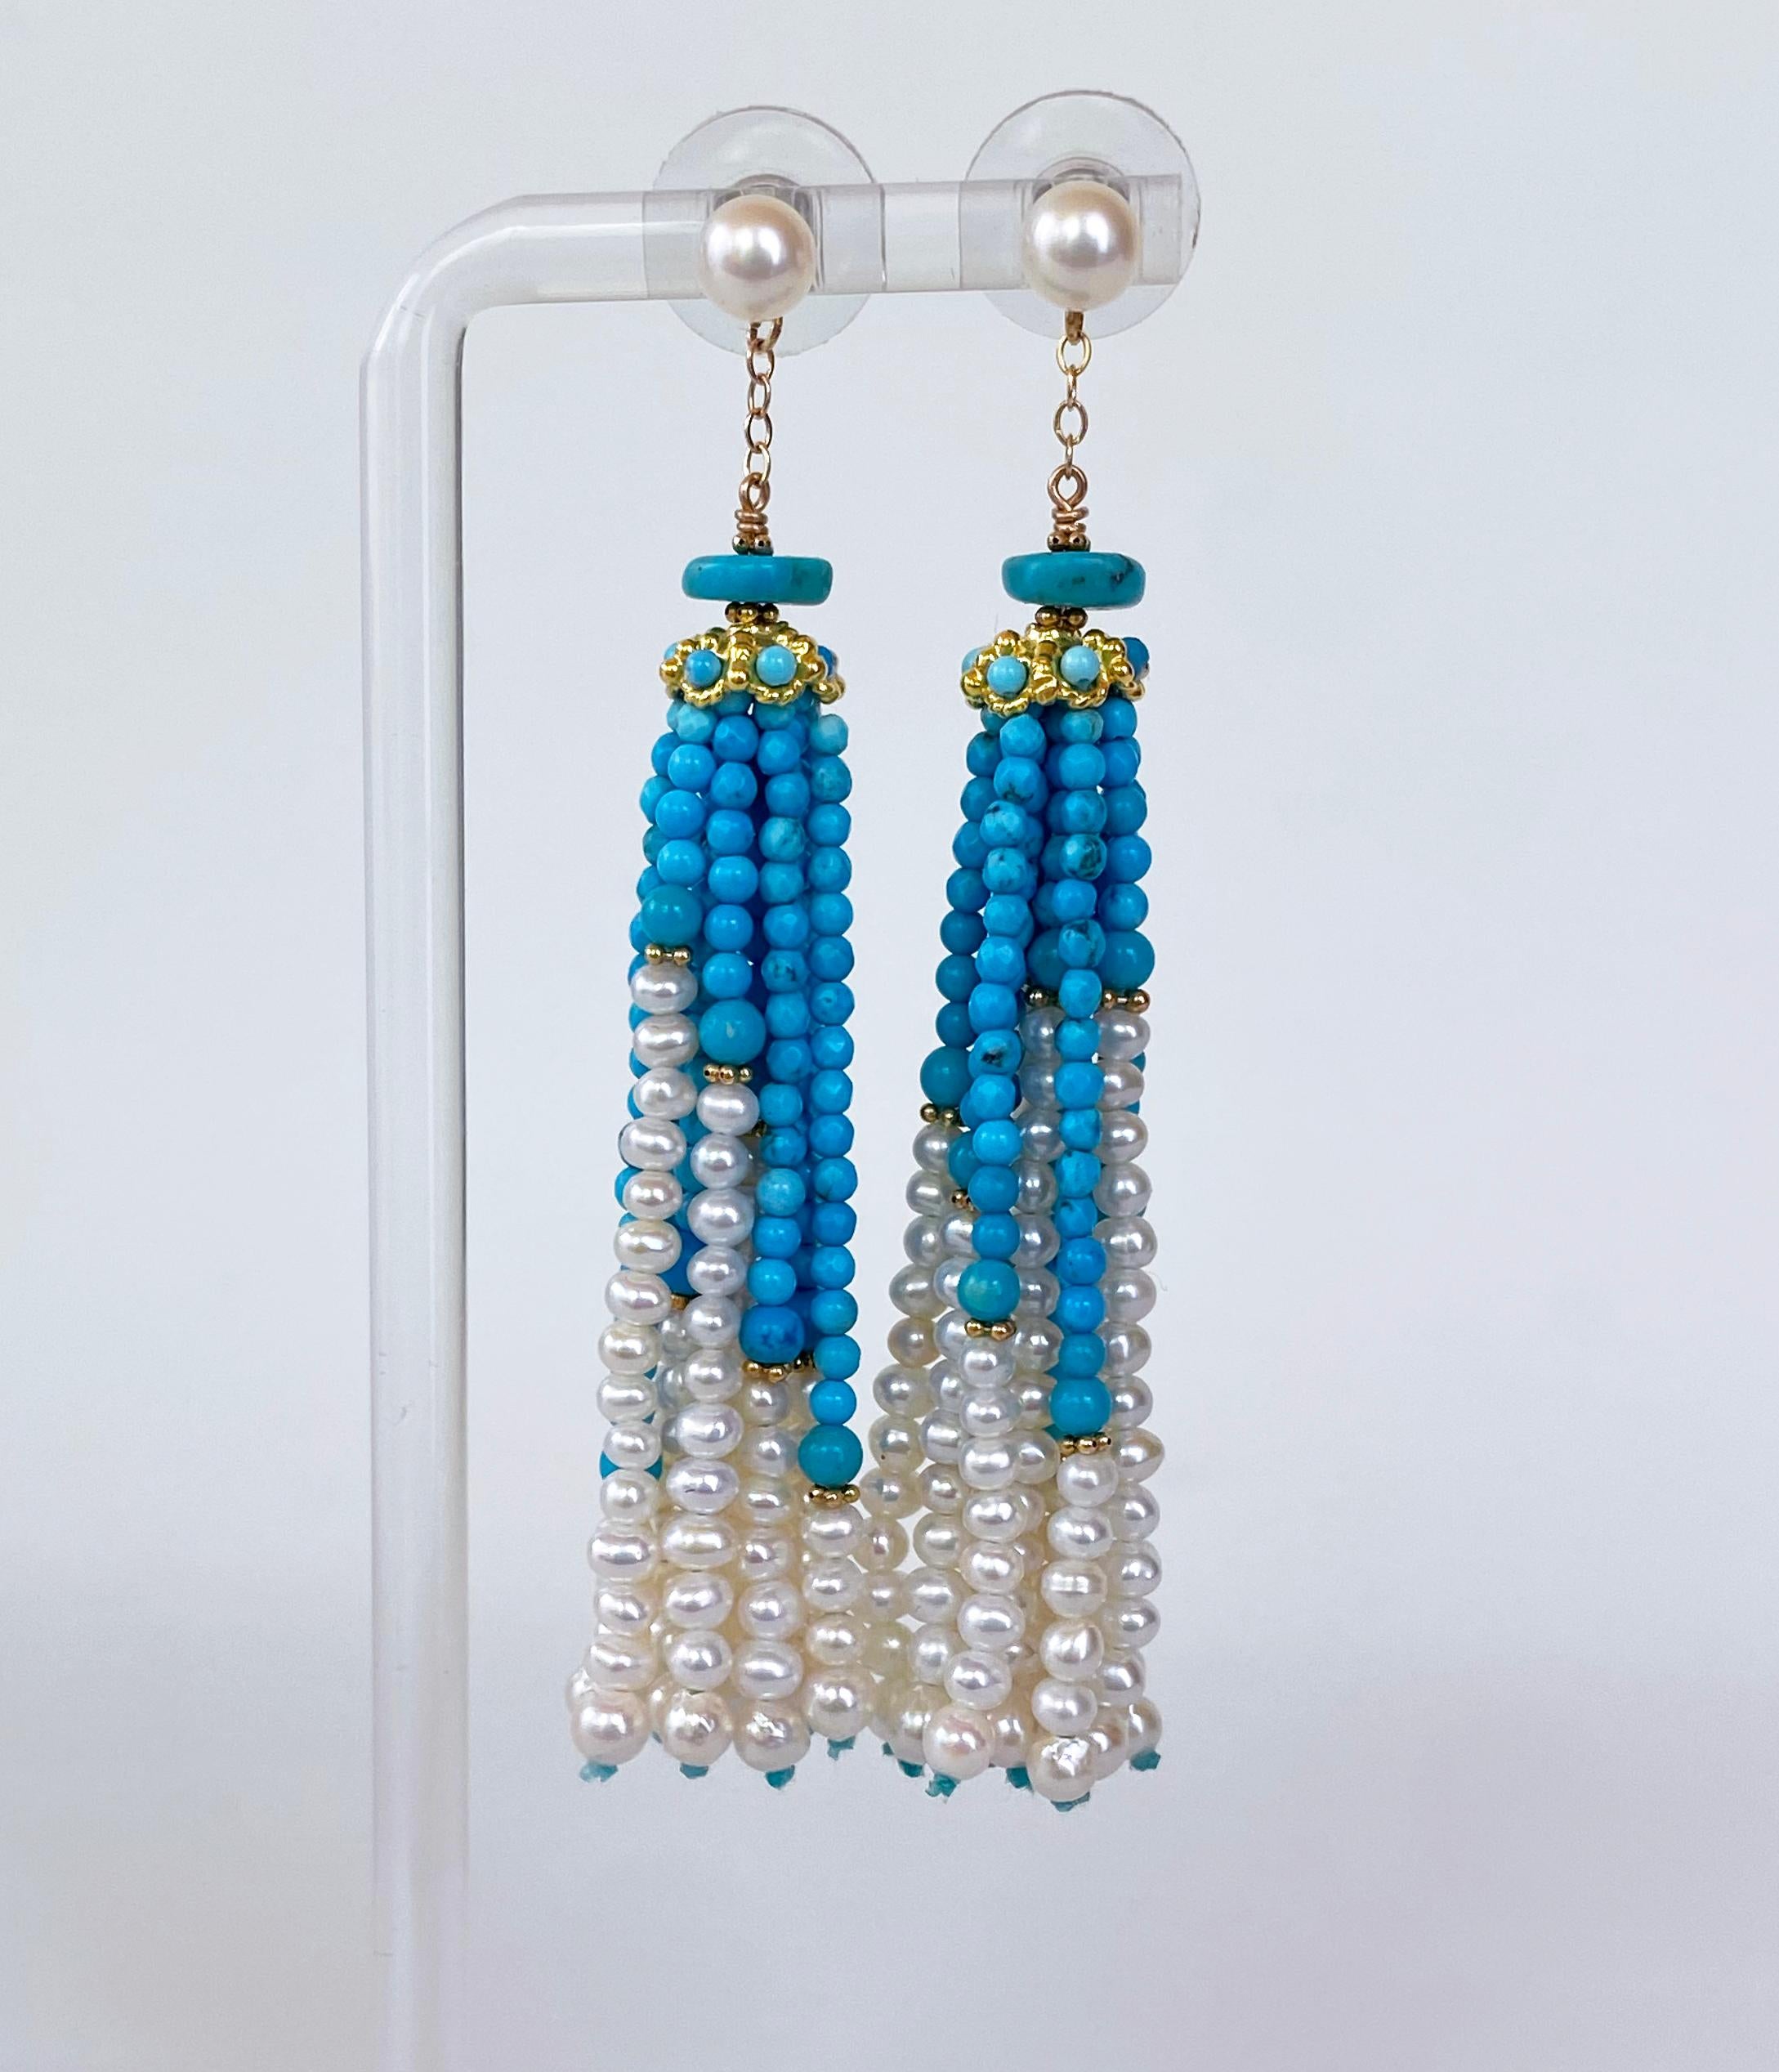 Gorgeous pair of earrings by Marina J featuring her classic Graduated Tassel Earring design. A solid 14k Yellow Gold chain hangs off a 5mm Studded Cultured Pearl. The chain attaches to a Turquoise roundel sitting atop a solid 14k Yellow Gold